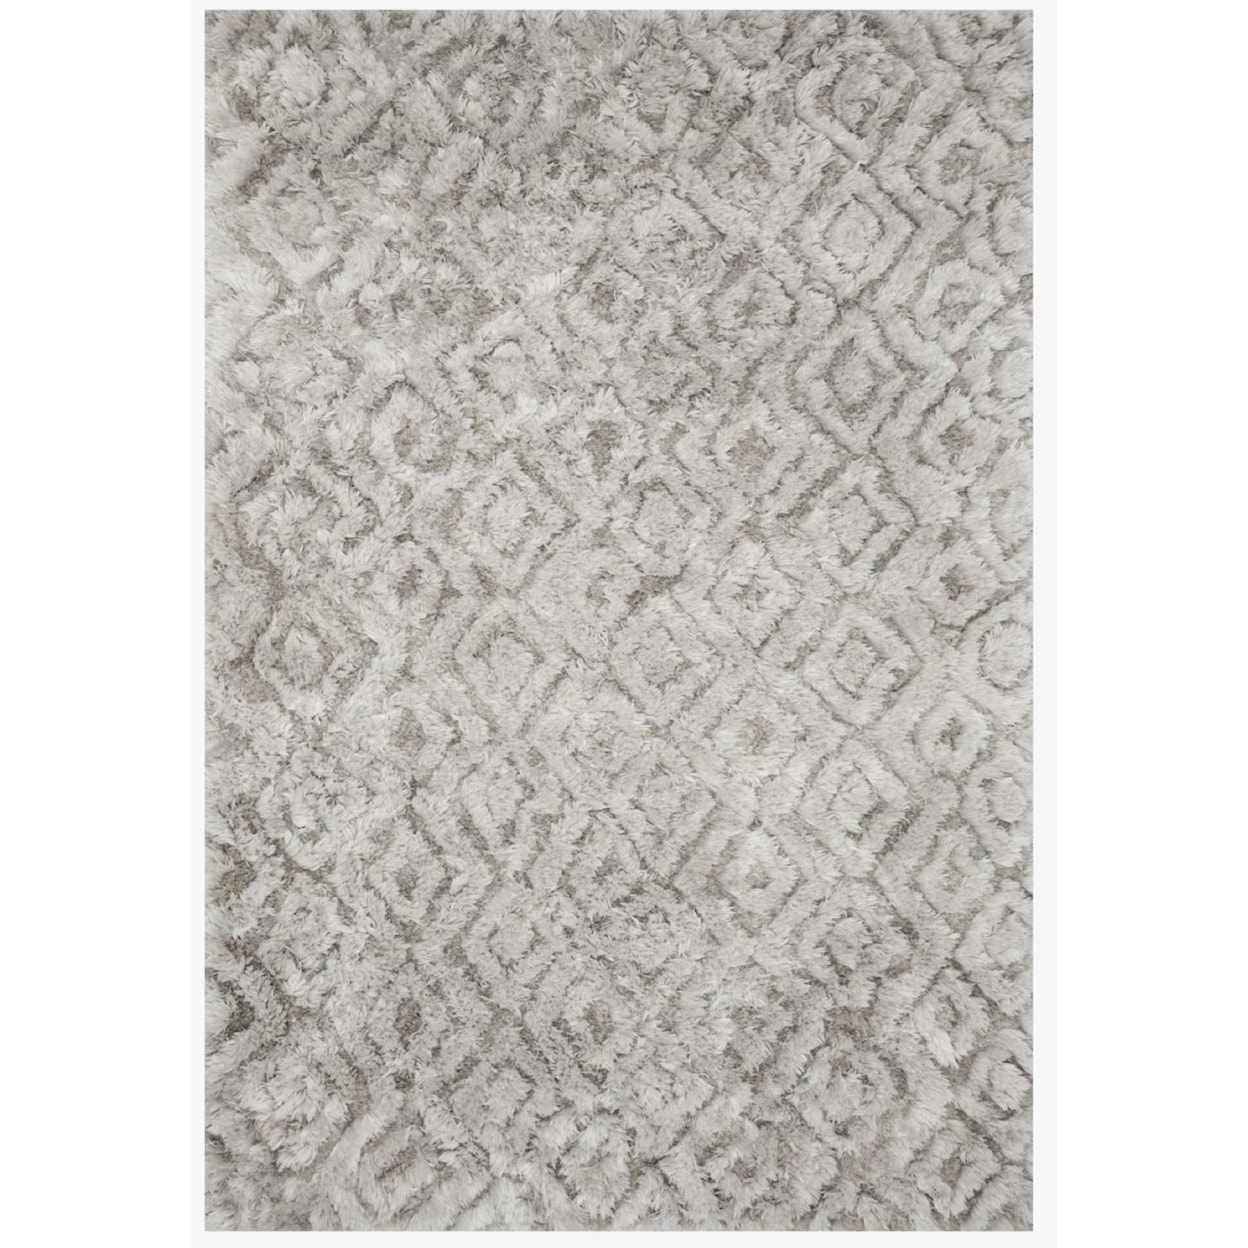 Reeds Rugs CASPIA 9-3 X 13 Silver Area Rug